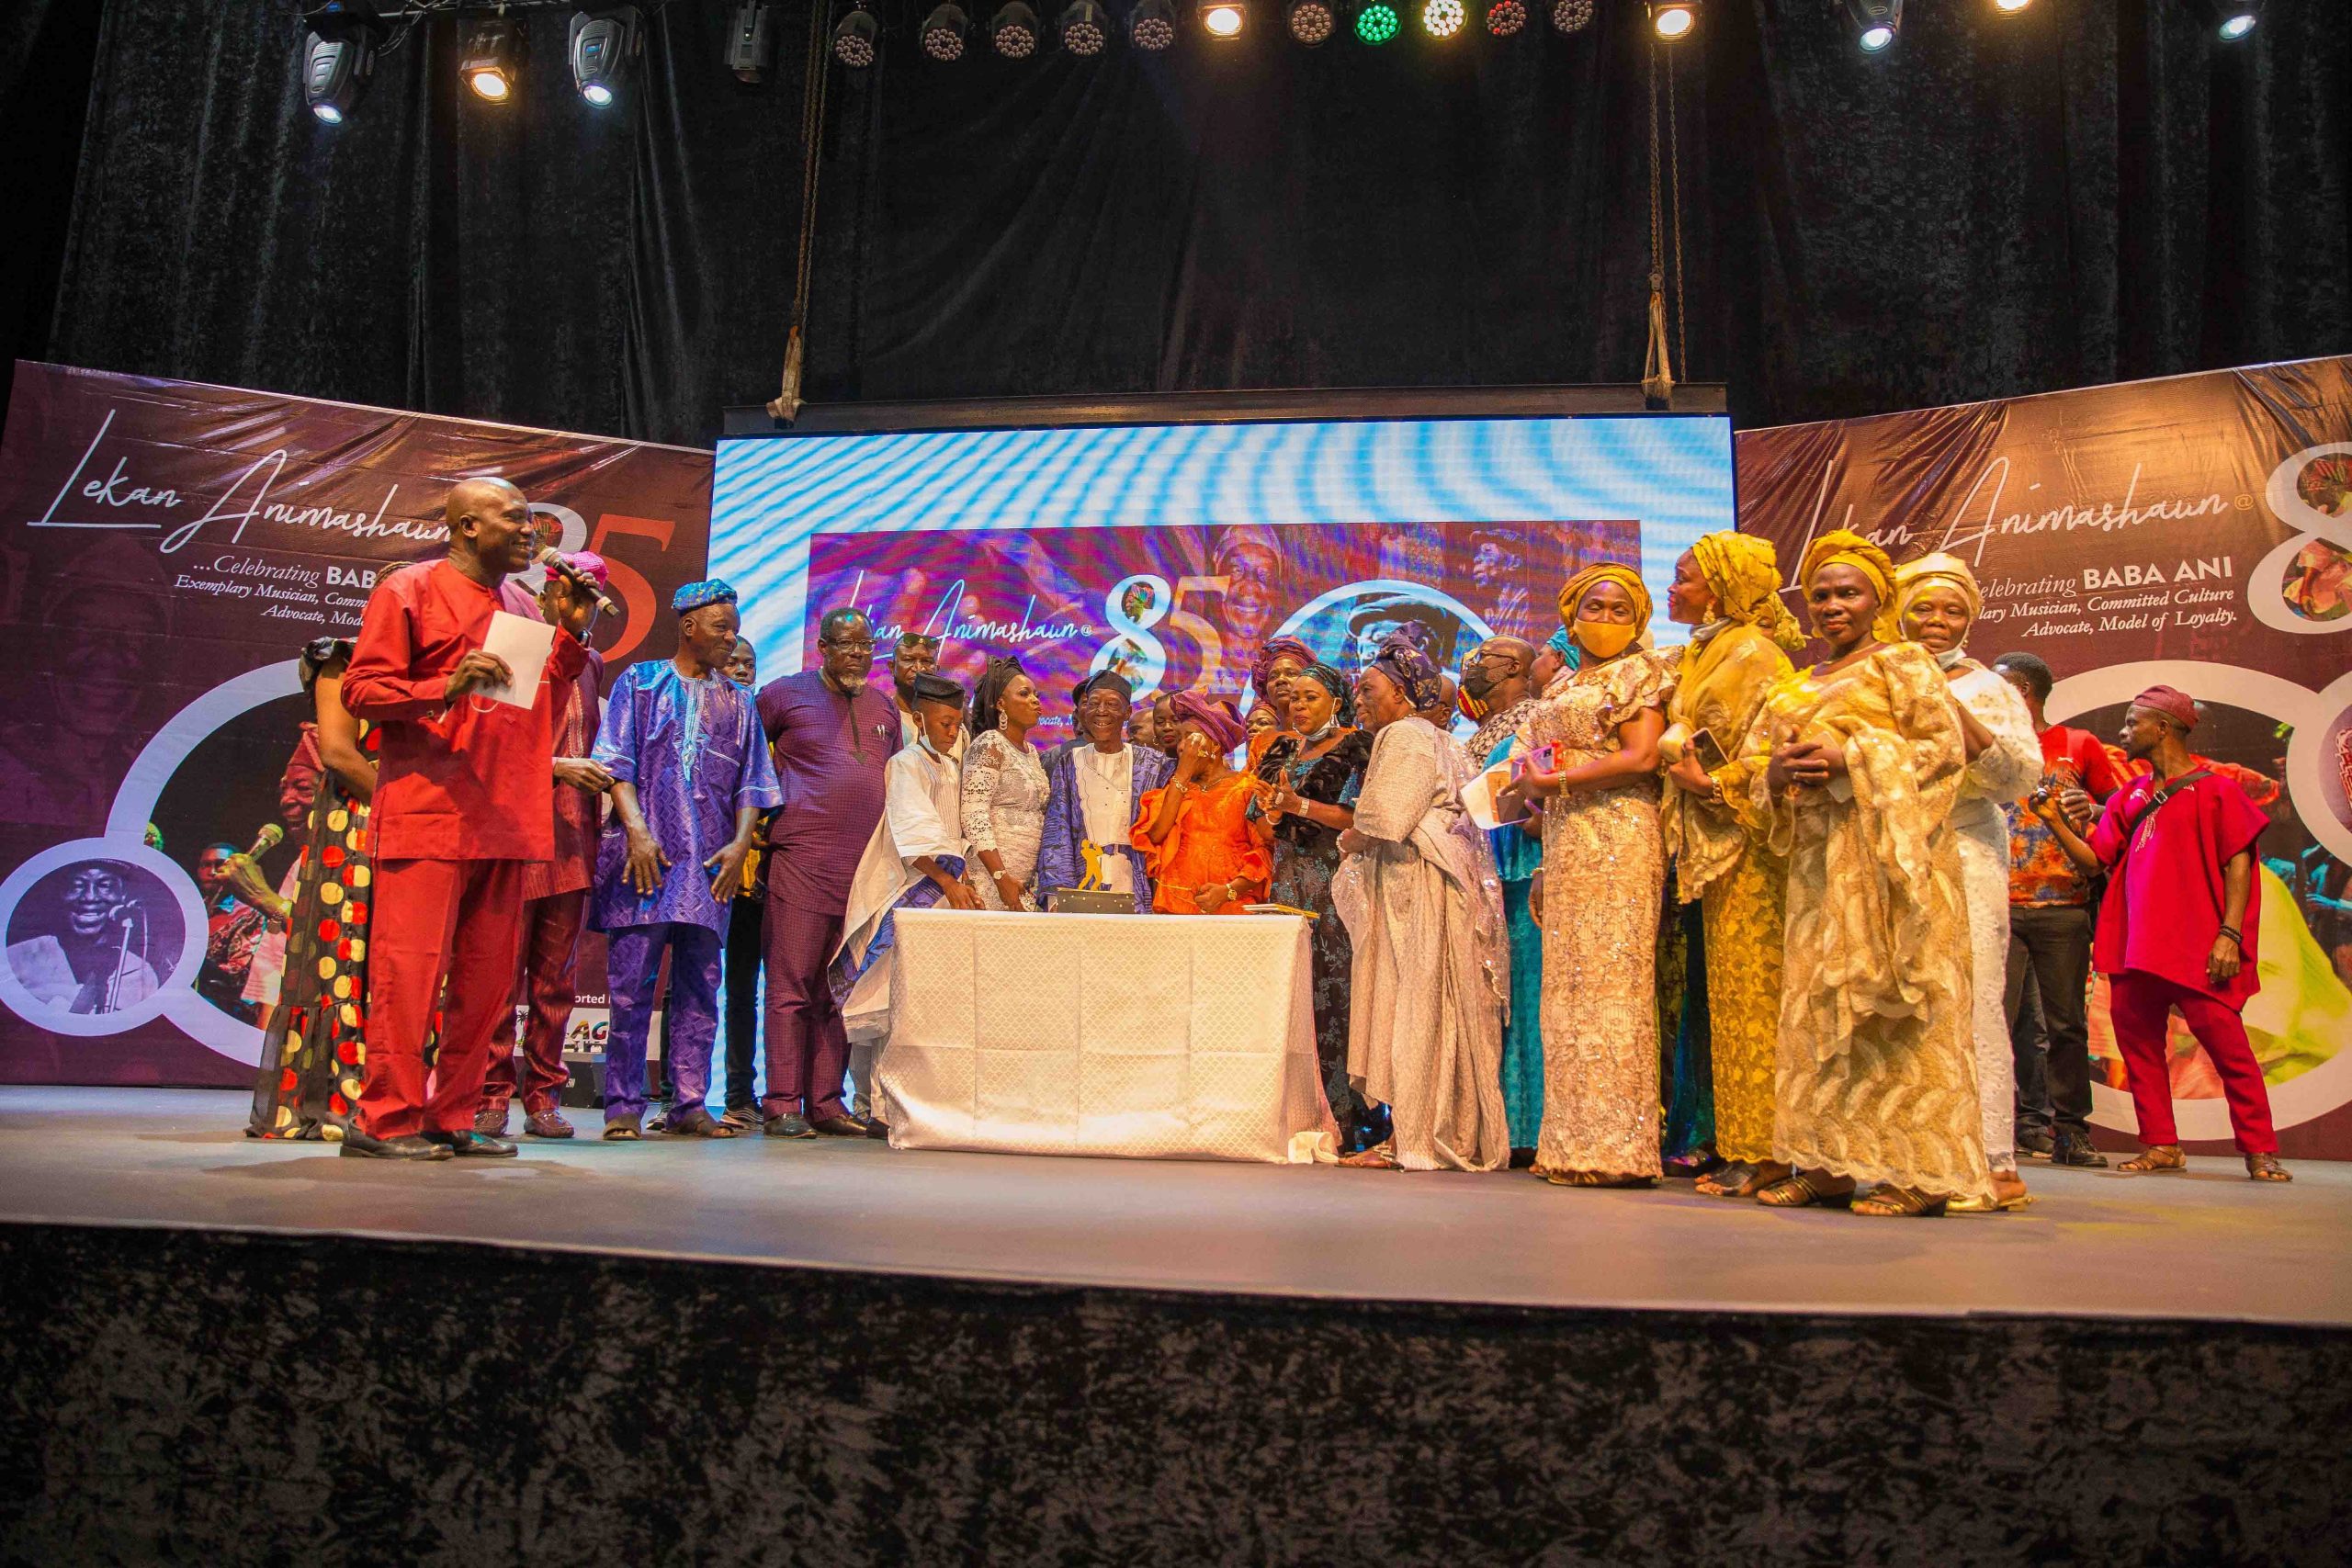 Family members and friends of Baba Ani joined him on stage to cut his birthday cake. Photo by Ayodele Efunla